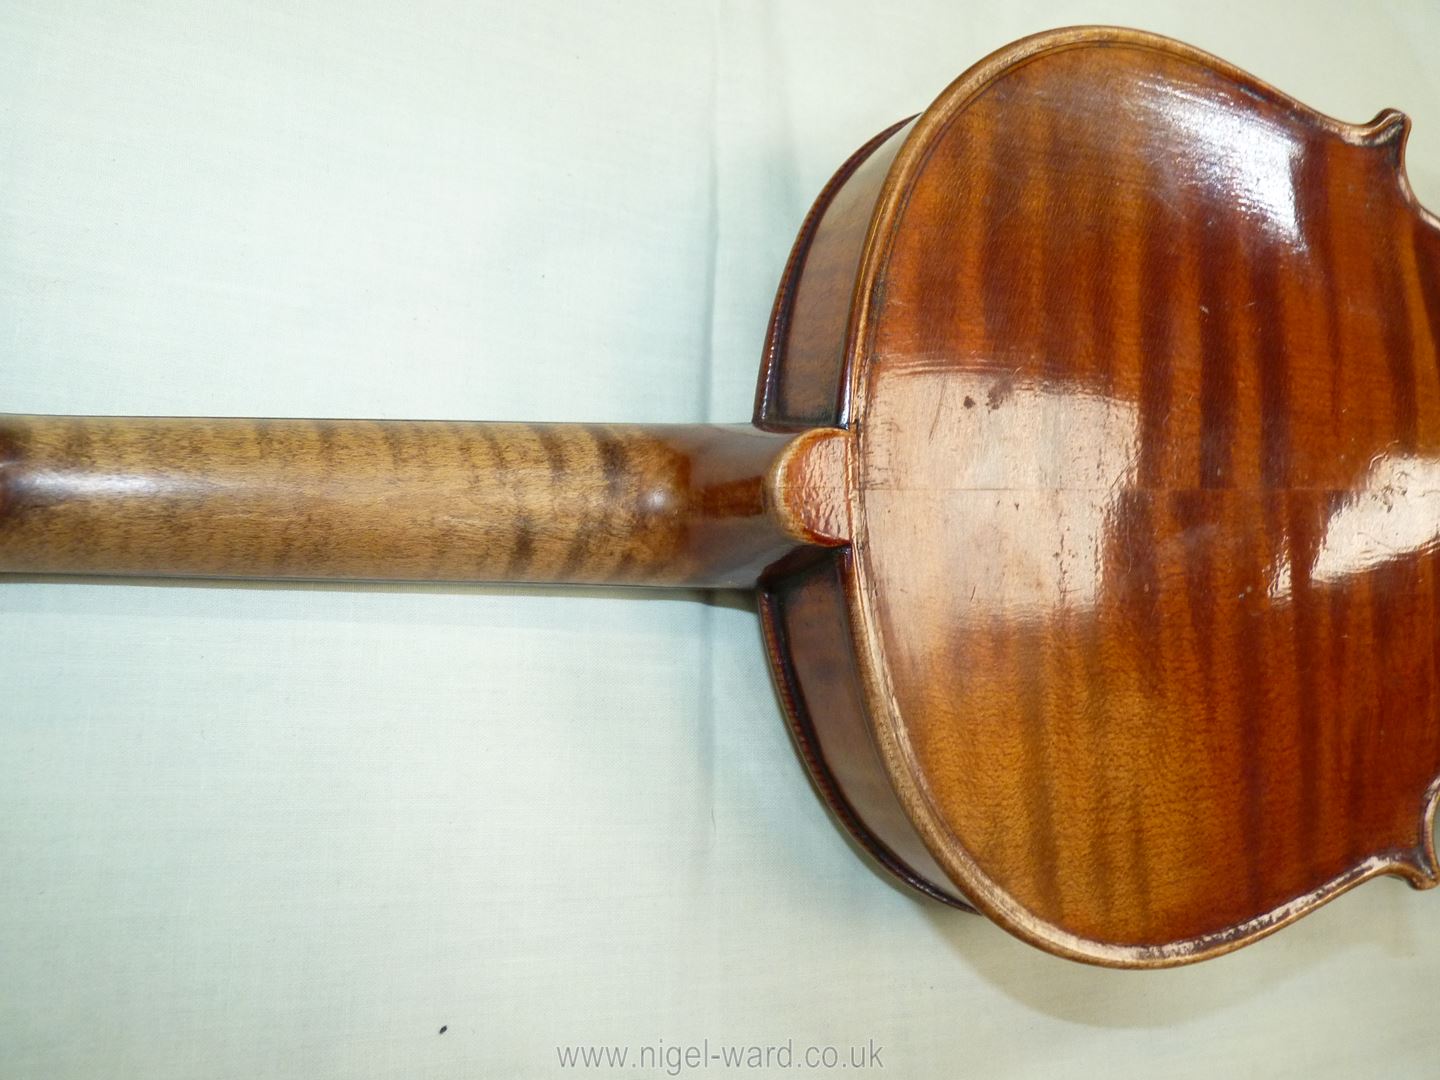 An antique violin having a well-carved scroll and nicely figured body including the back, - Image 12 of 49